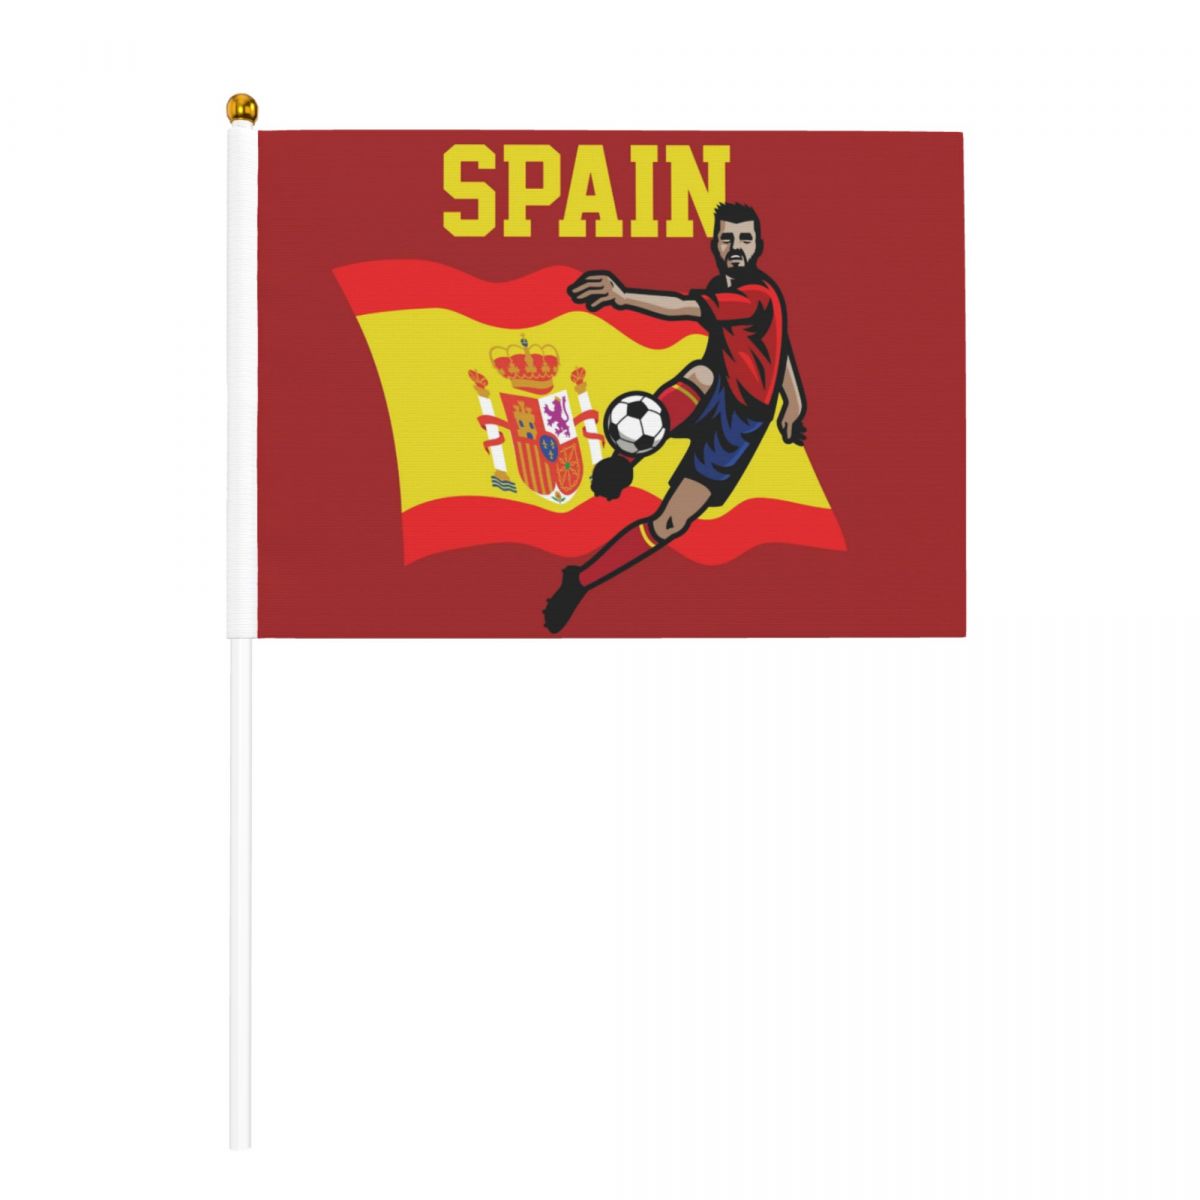 Spain Soccer Player Hand Held Small Miniature Flags on Stick